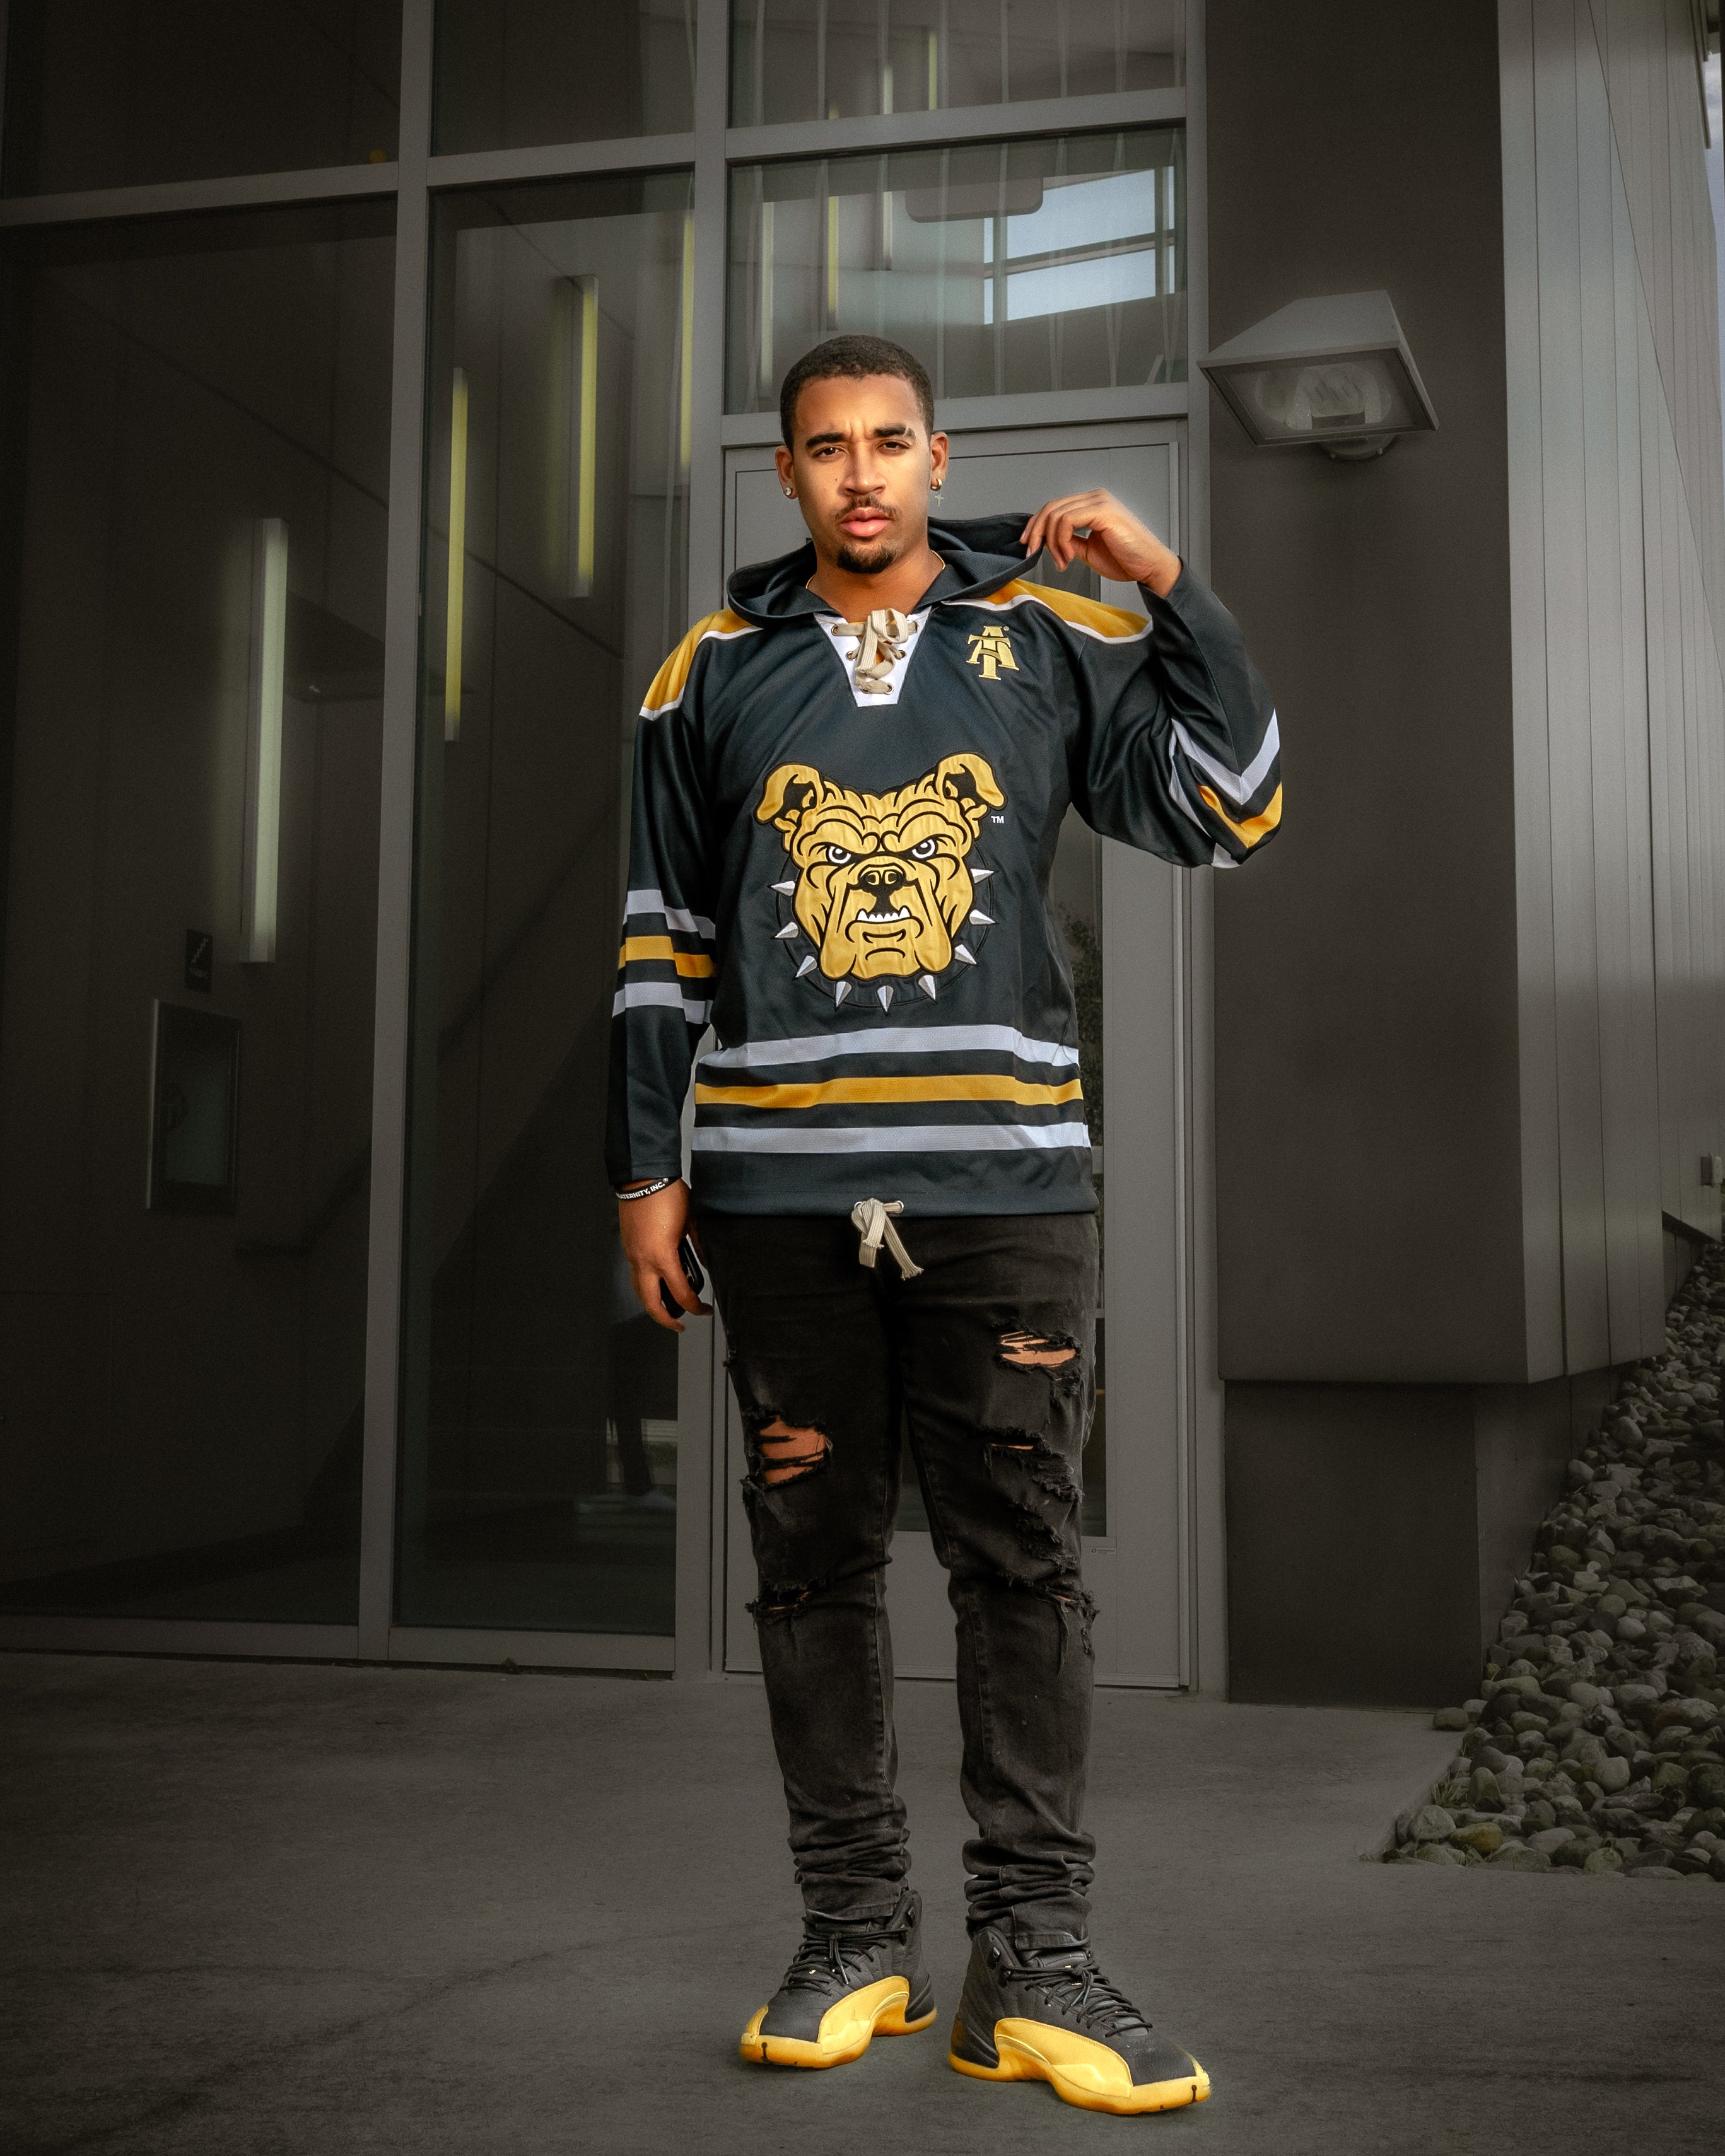 The Best HBCU Apparel for Homecoming Season